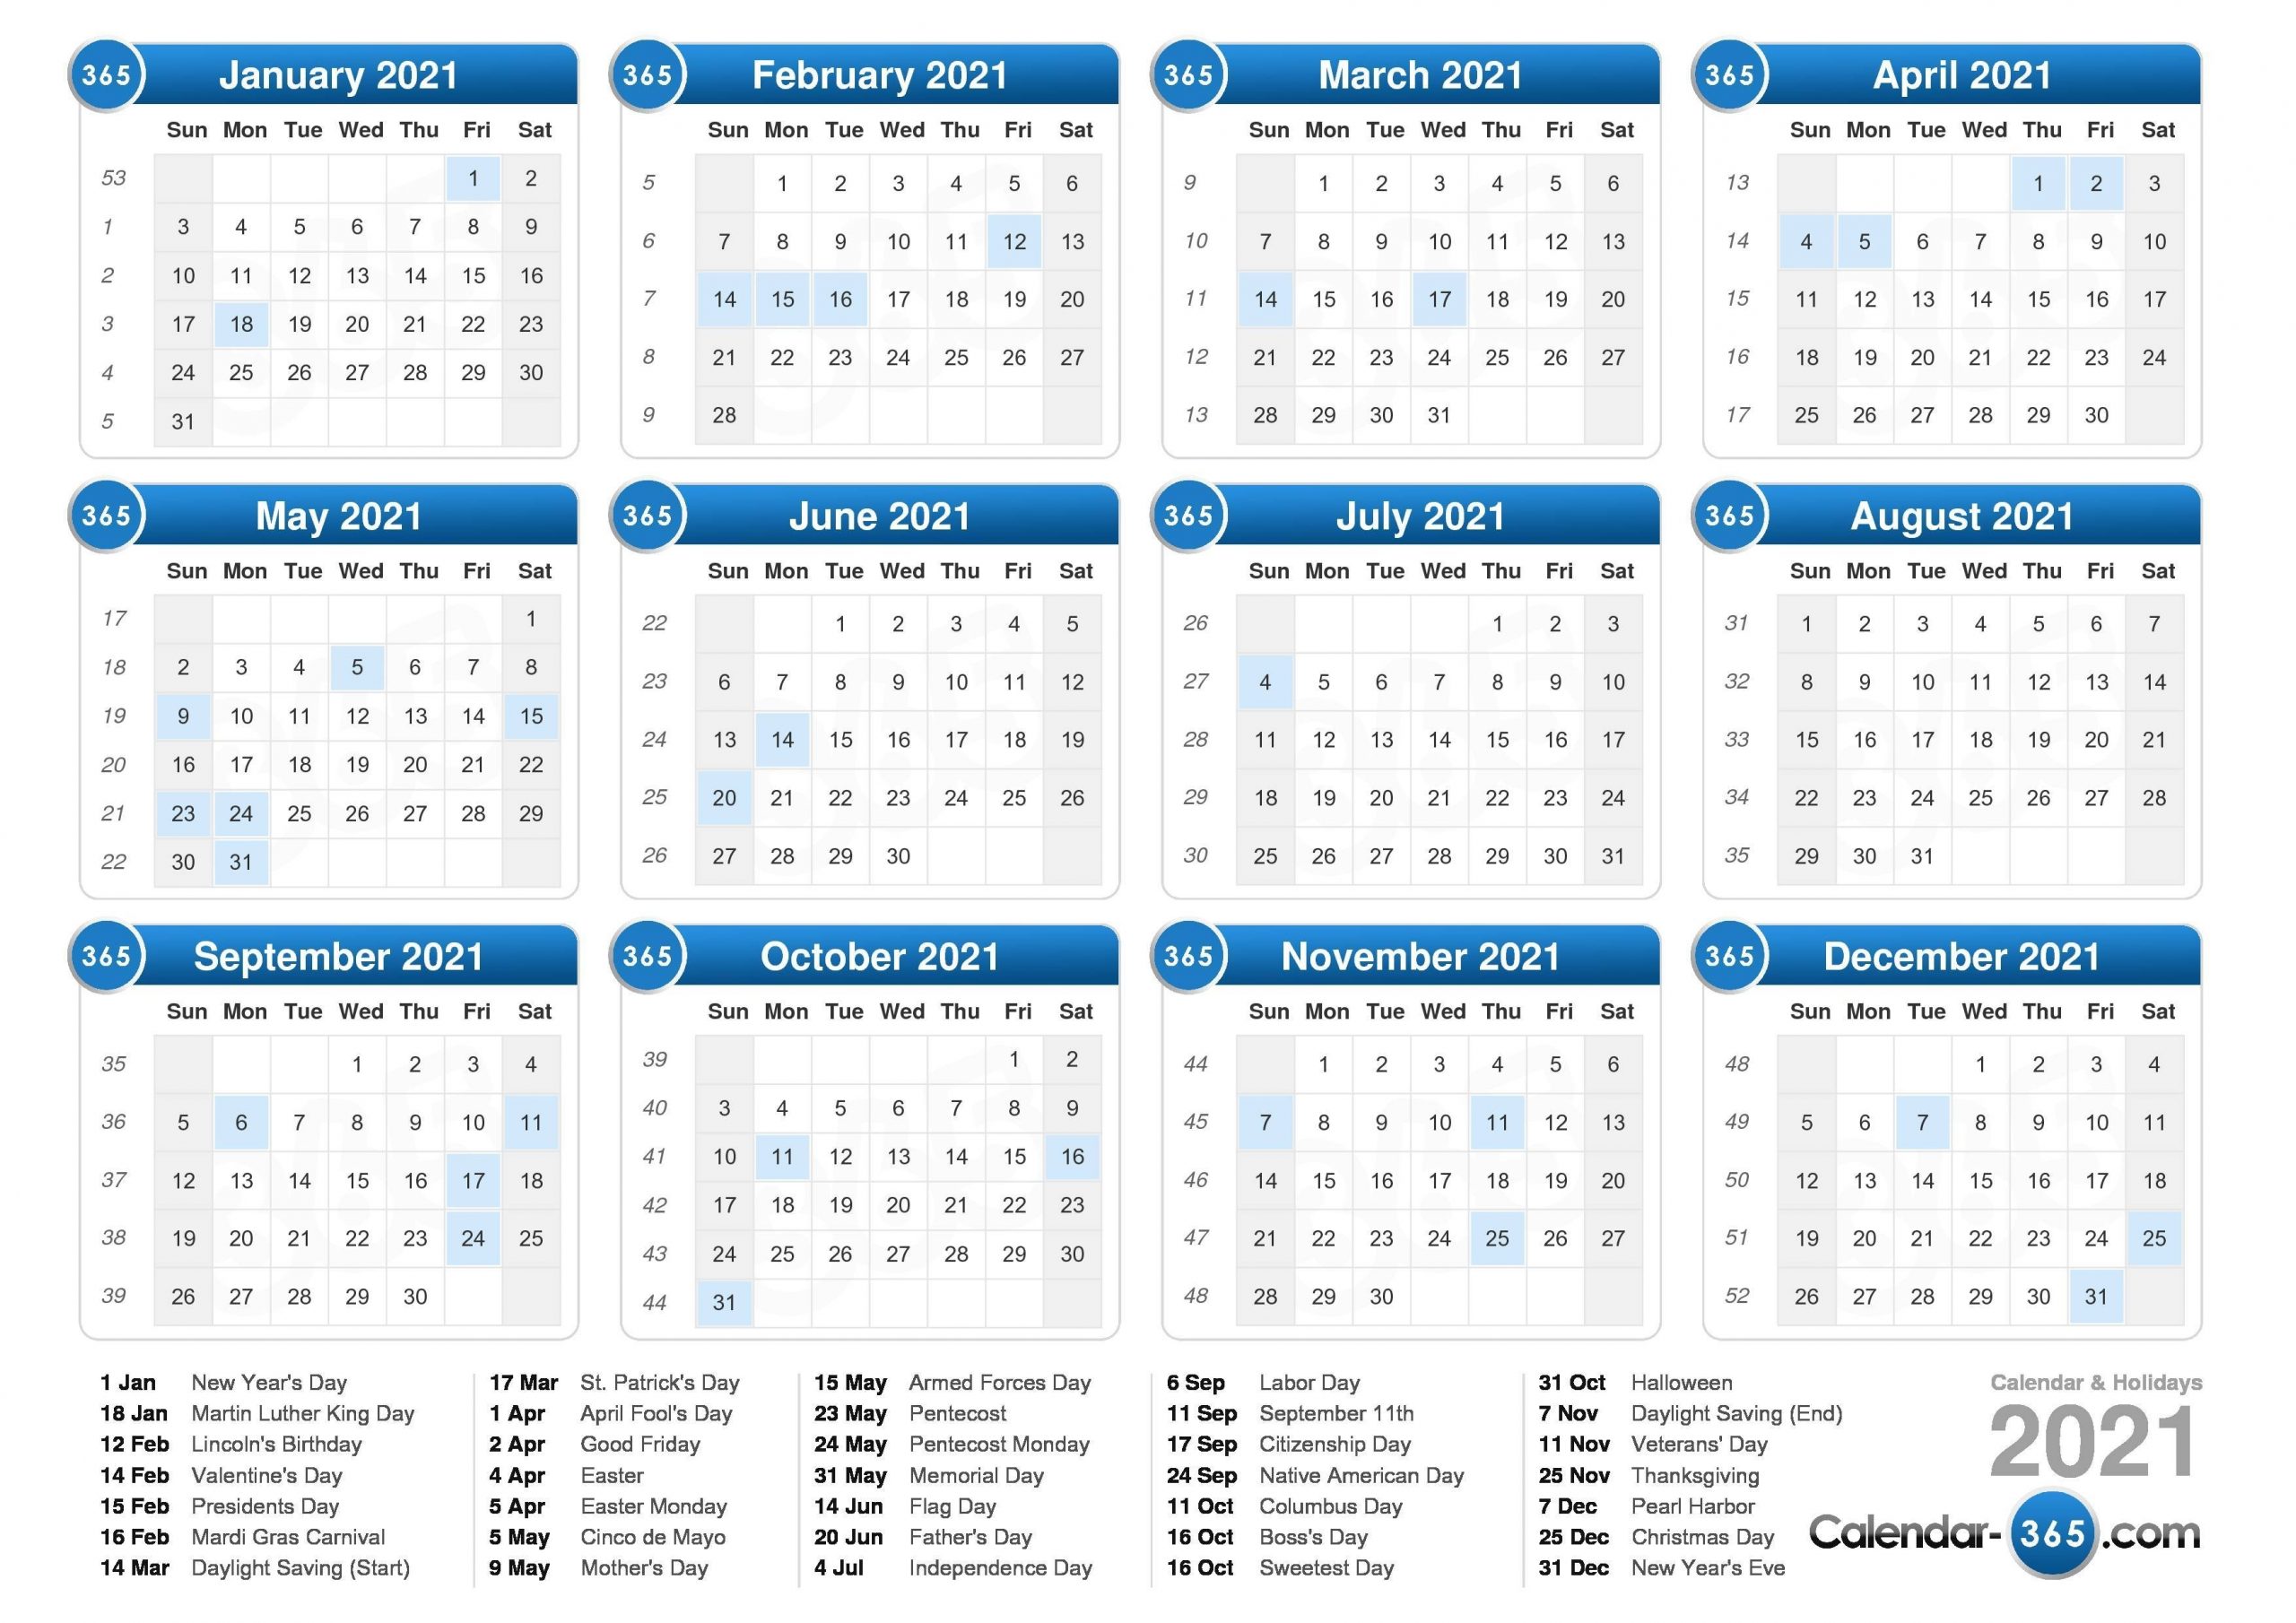 Take Calendar 2021 With Days Numbered